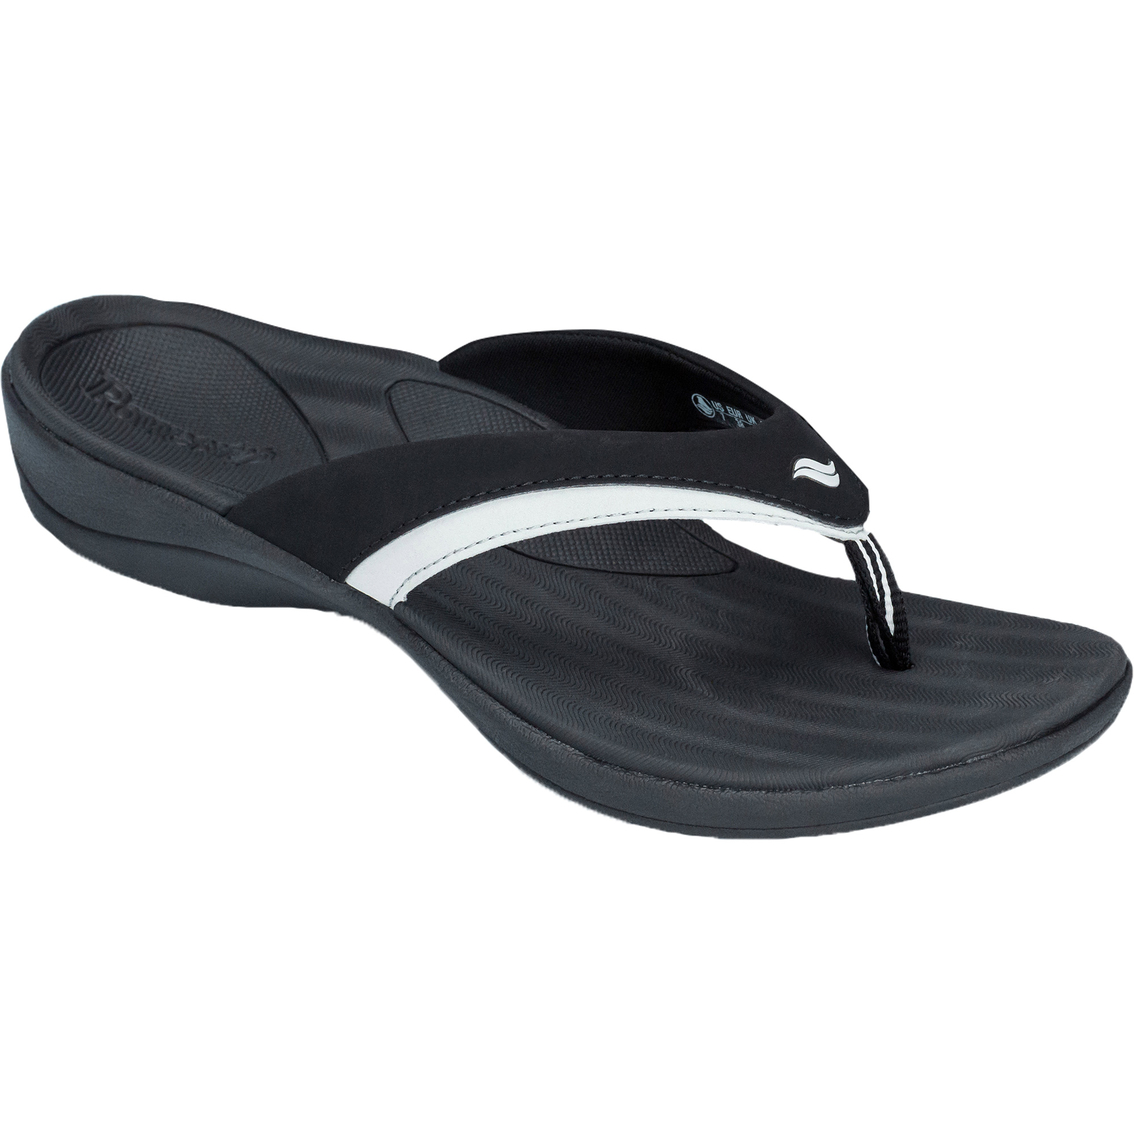 Powerstep Women's Fusion Orthotic Sandals - Image 5 of 5